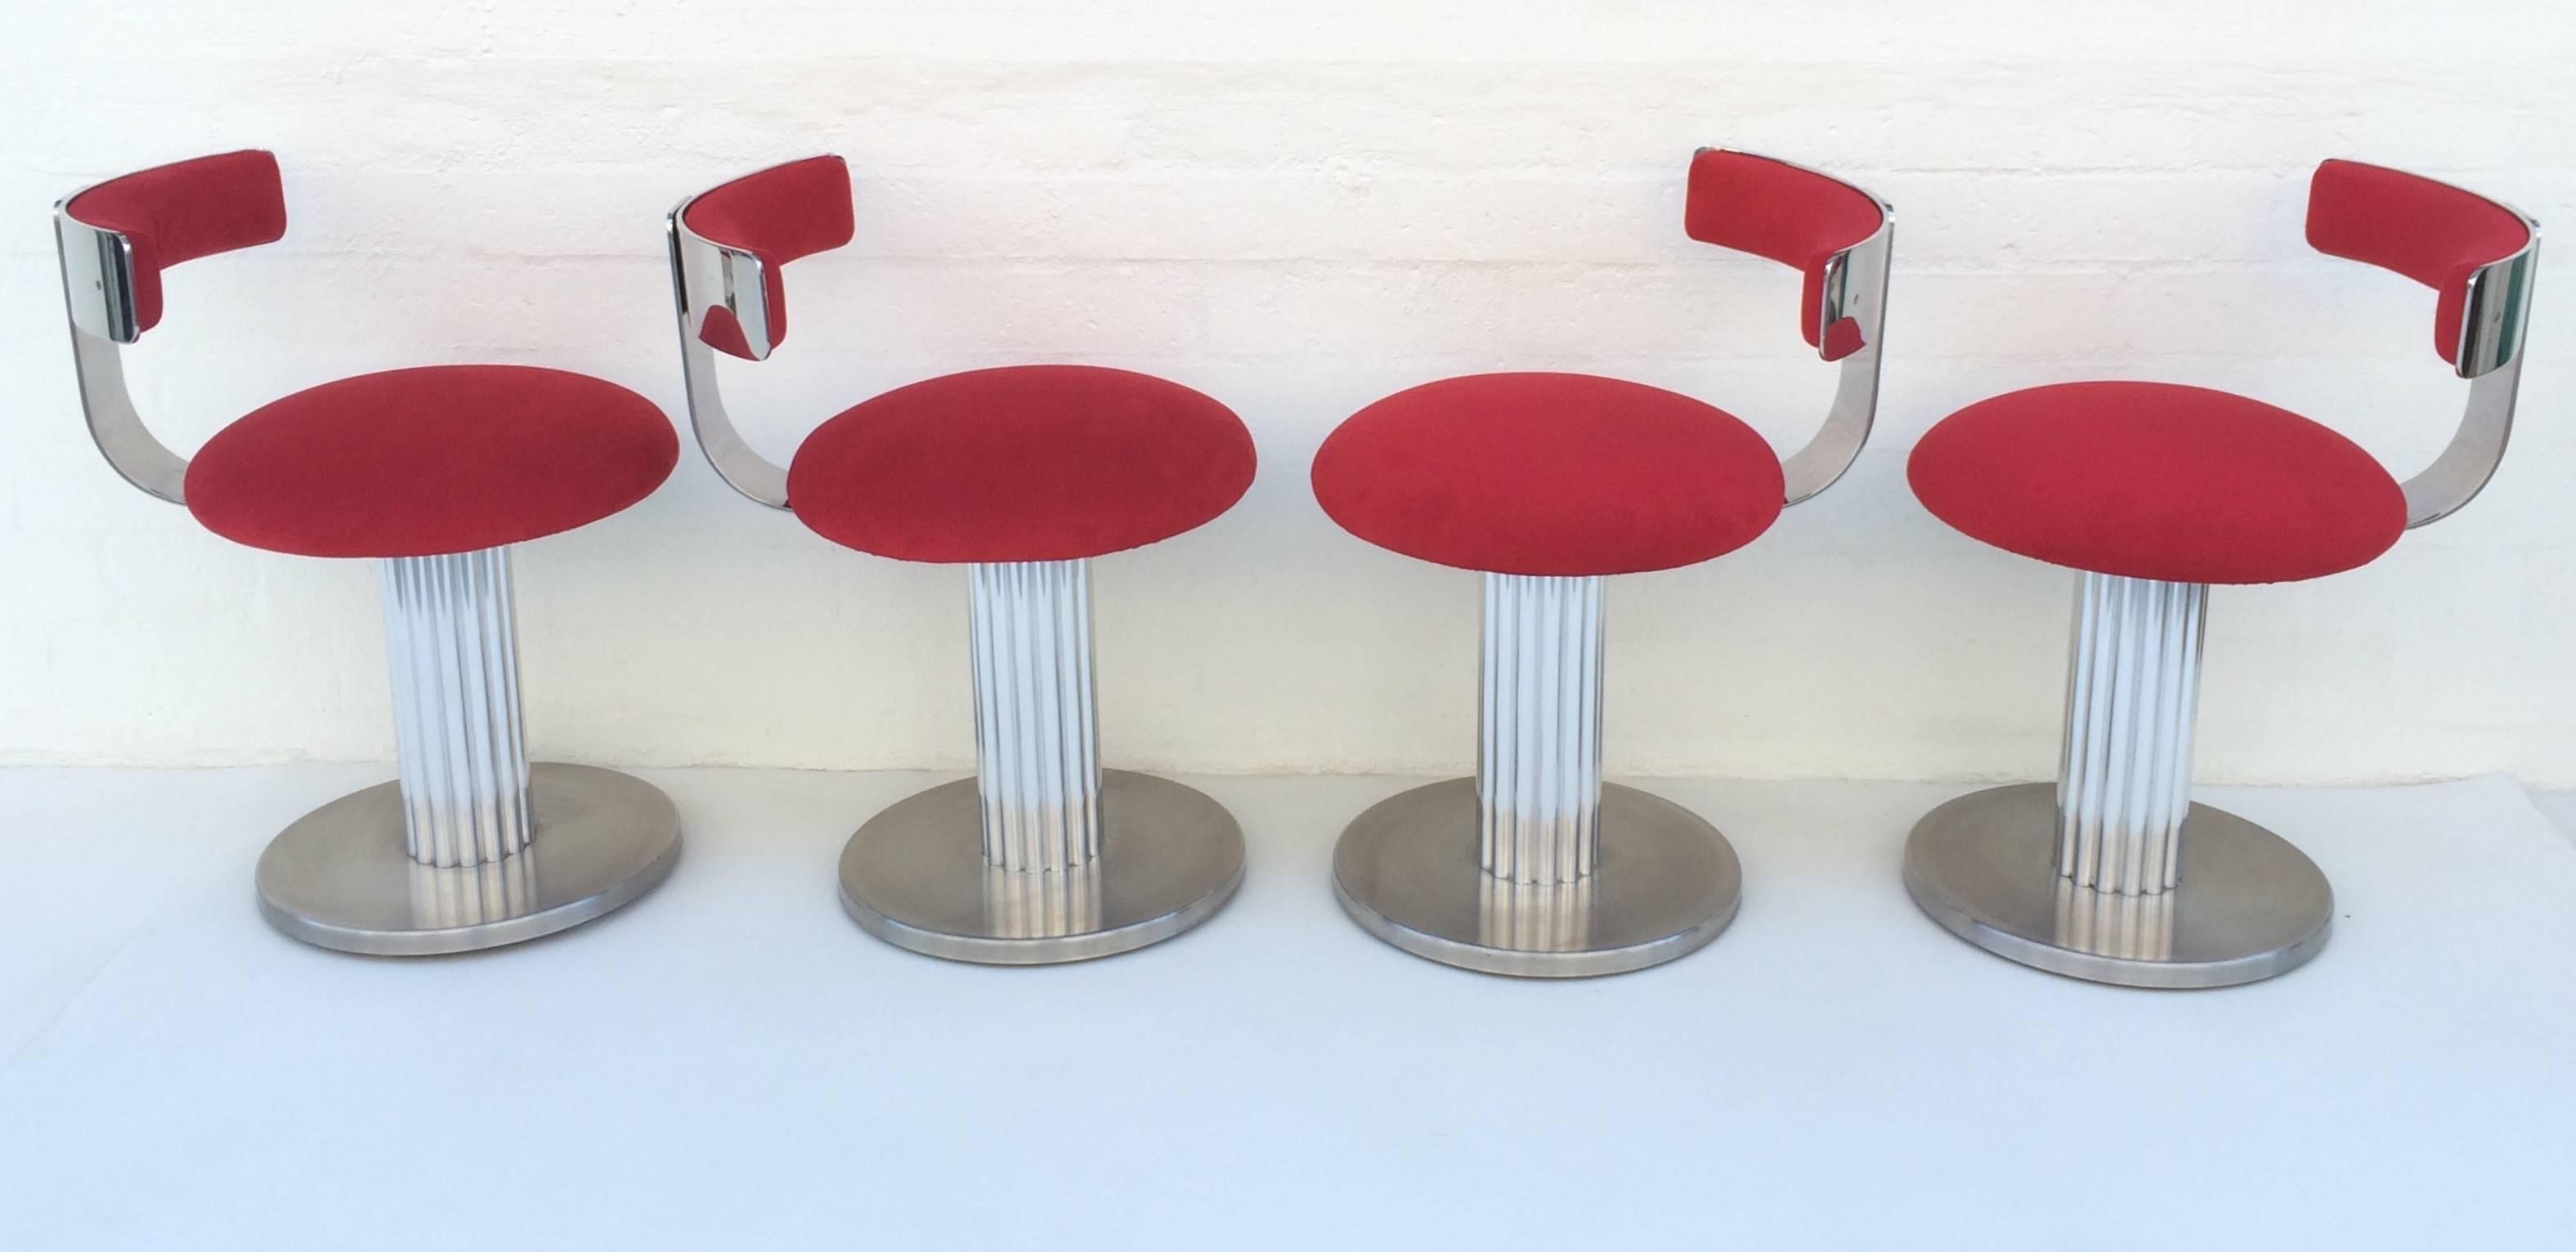 These swivel stools are made of mixed metals with the base being brushed stainless steel and polished aluminum.
The backrest is polished stainless steel.
Upholster in a red ultra-suede.